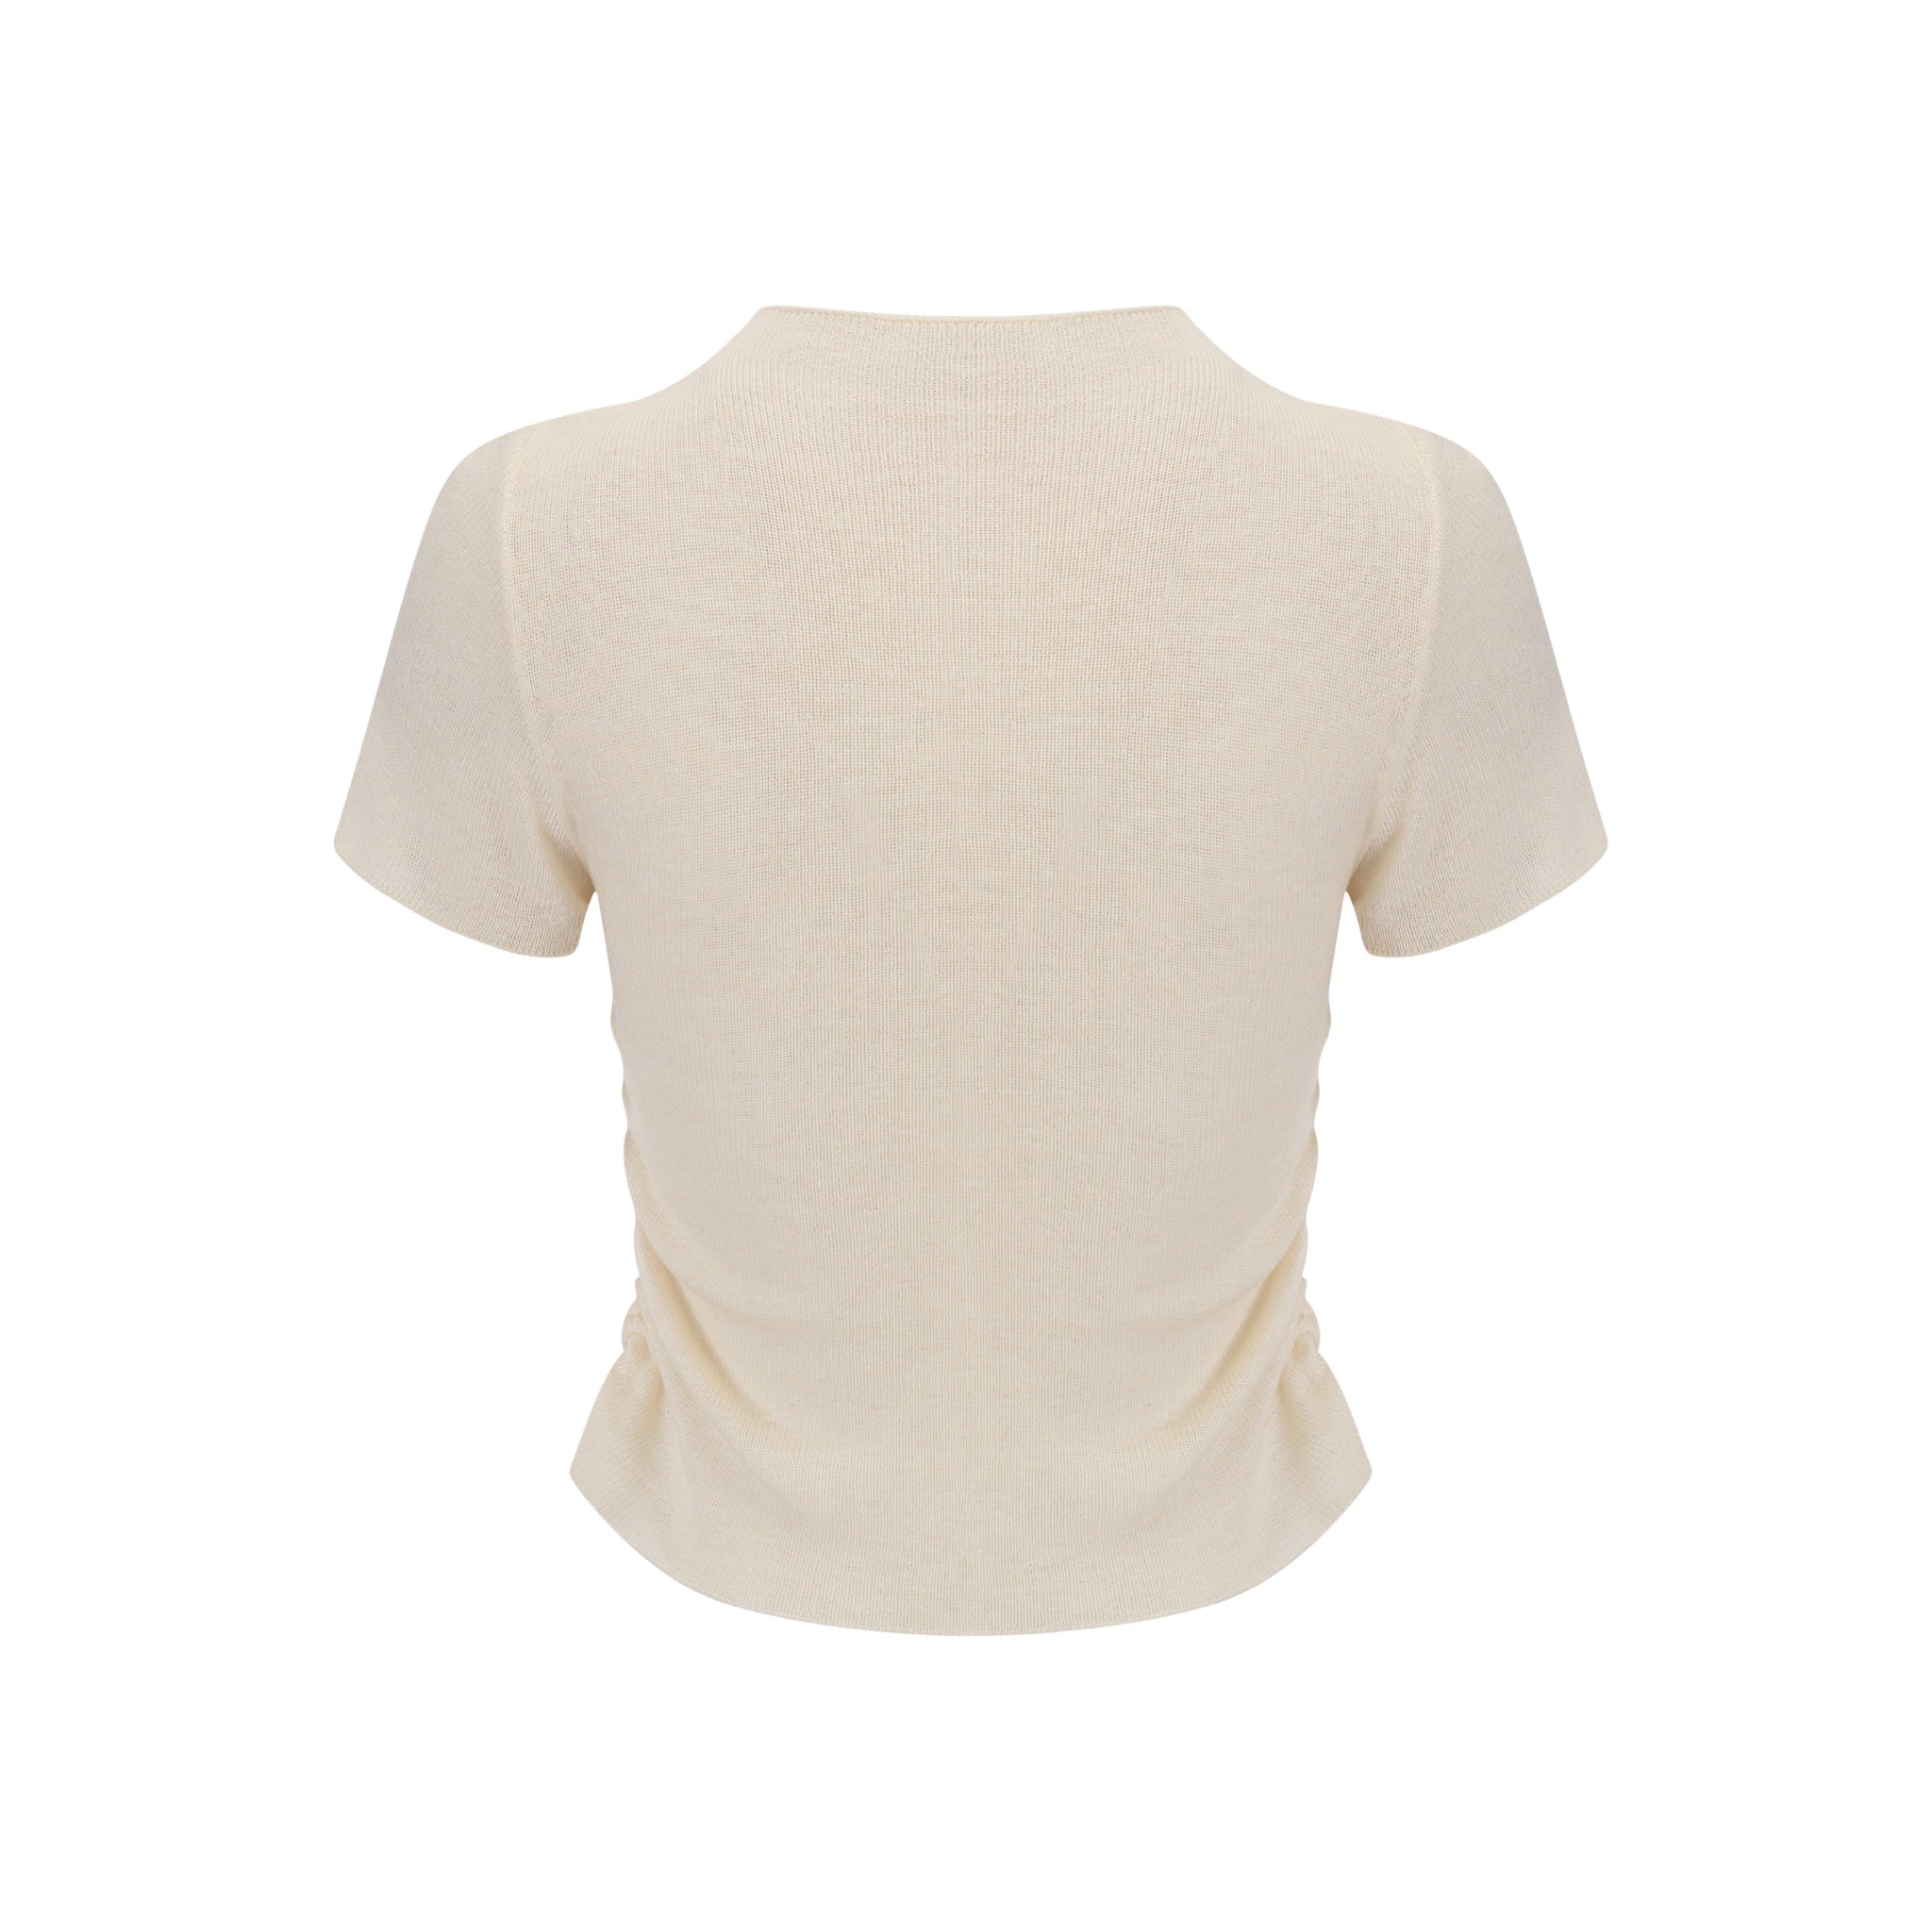 ARTE PURA Beige Bow Tie Knit Top With Chain | MADA IN CHINA